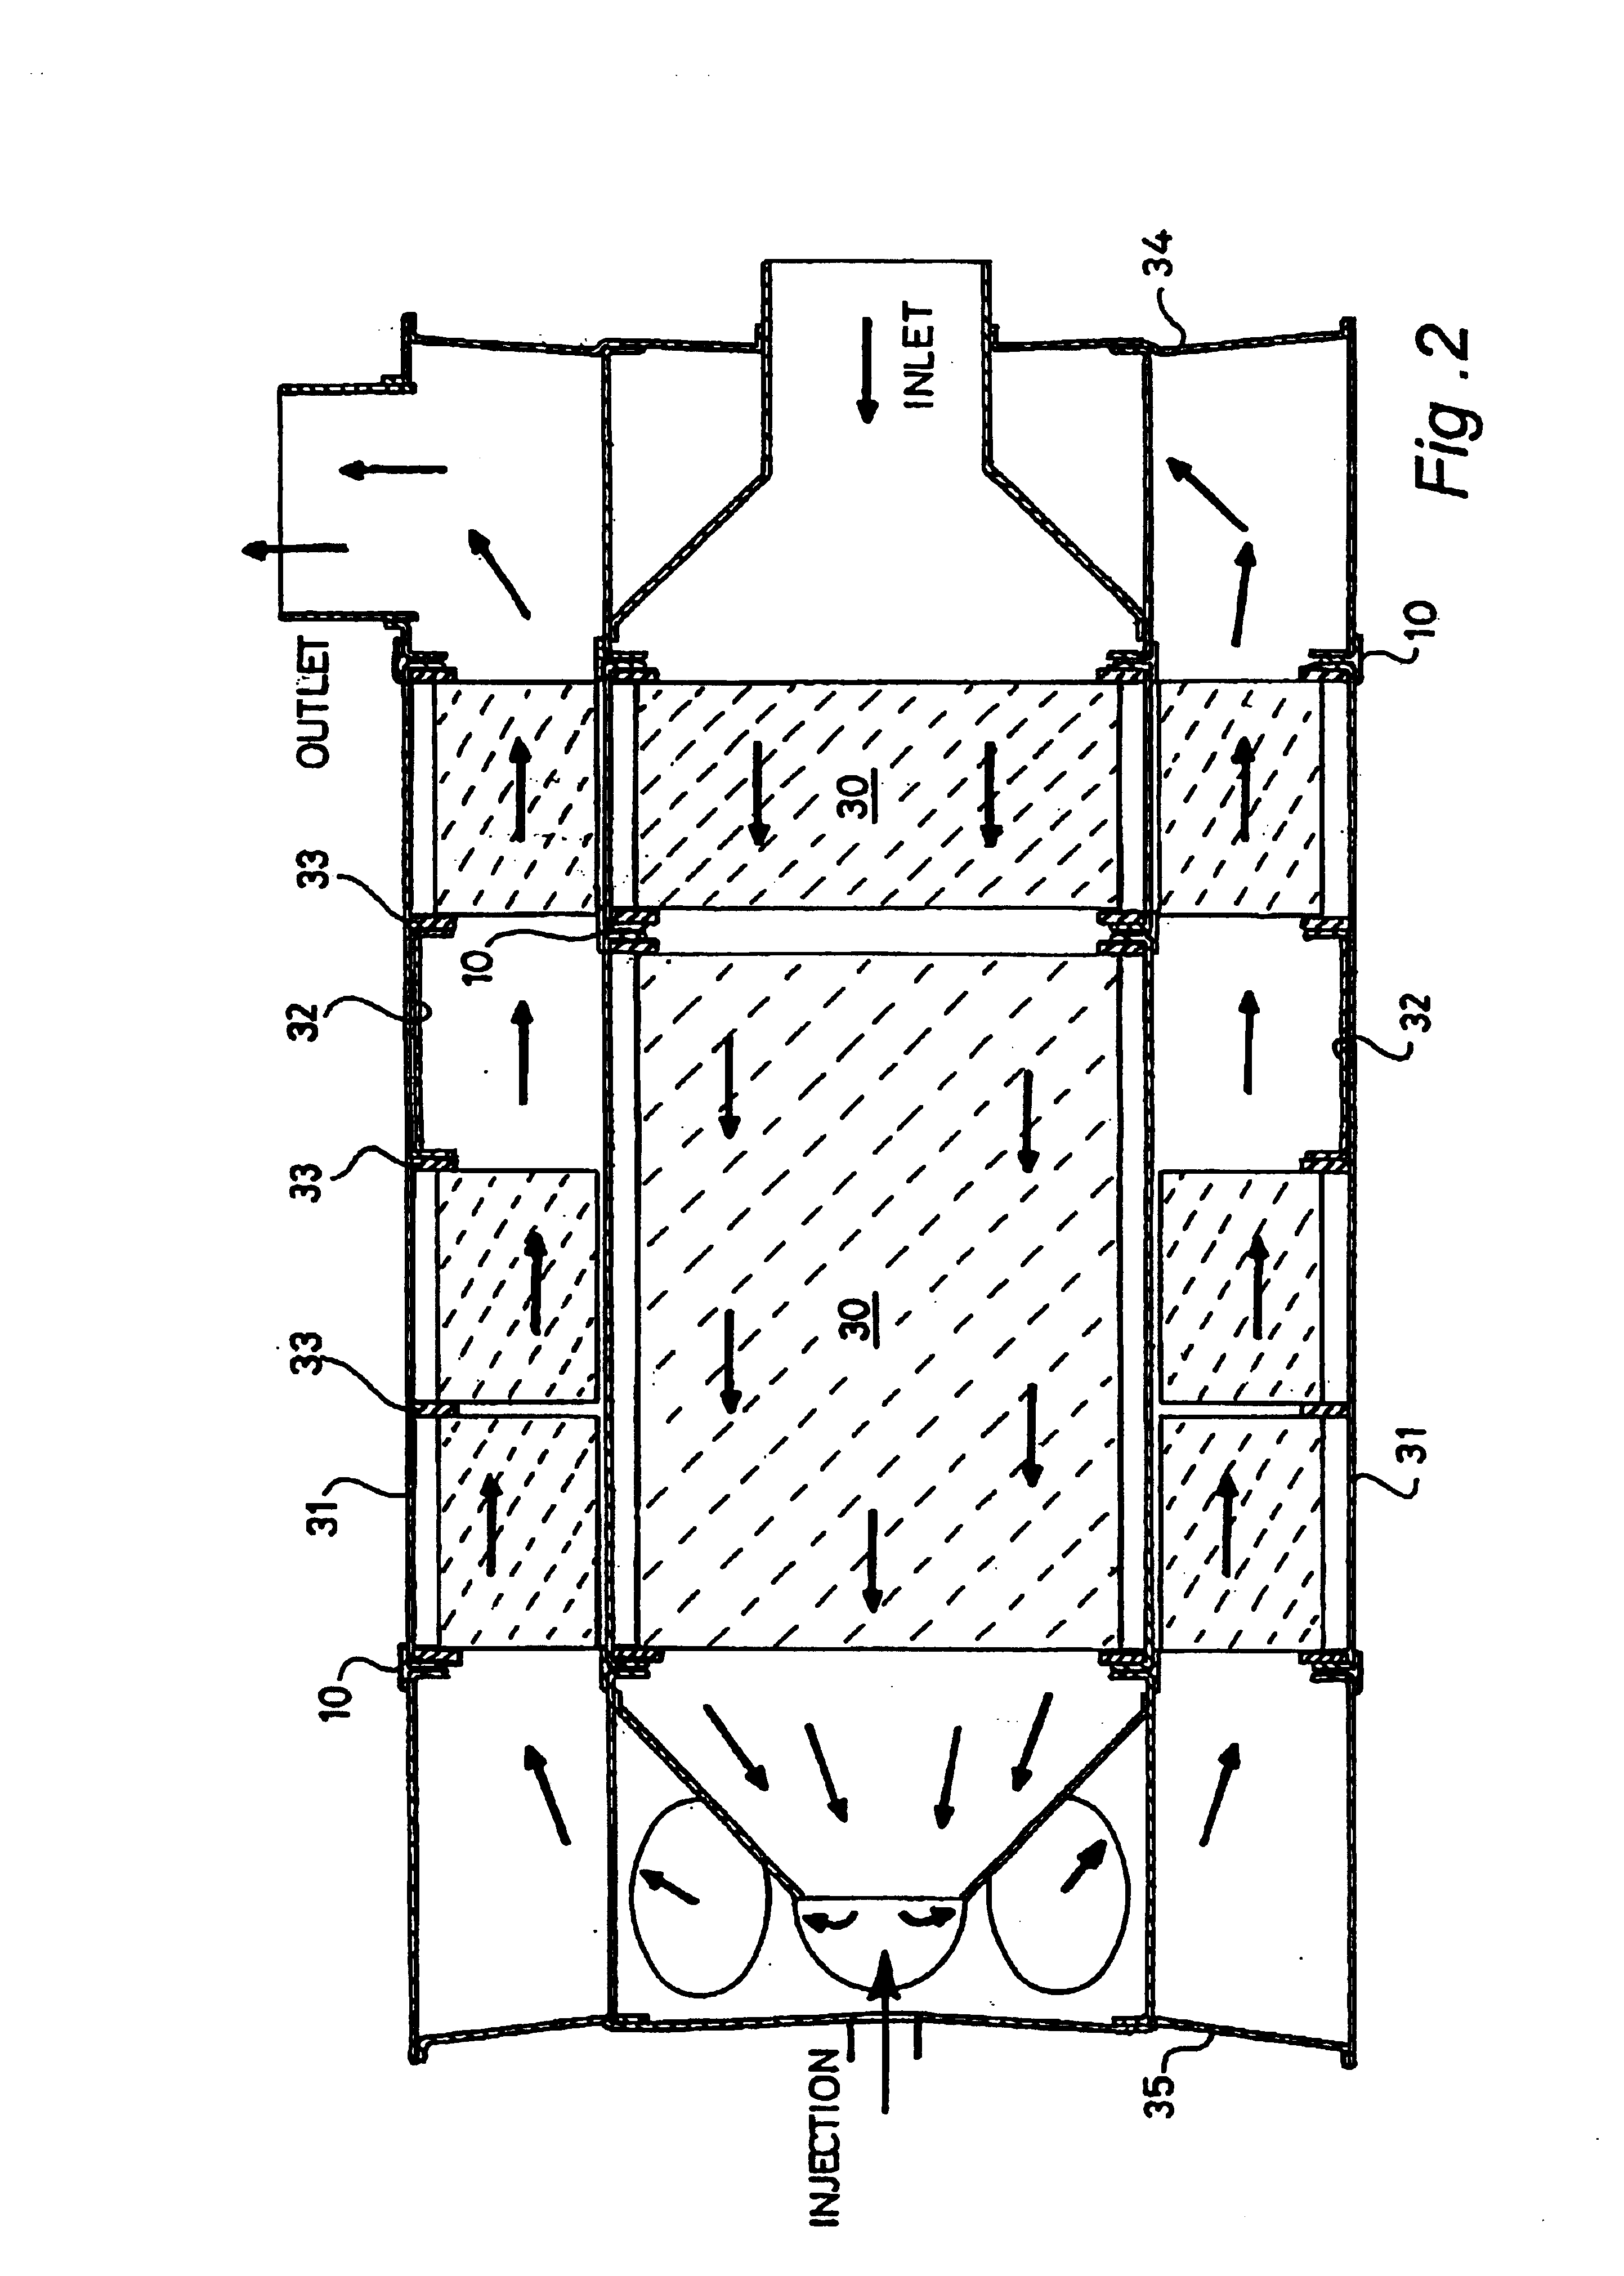 Apparatus for treating a gas stream